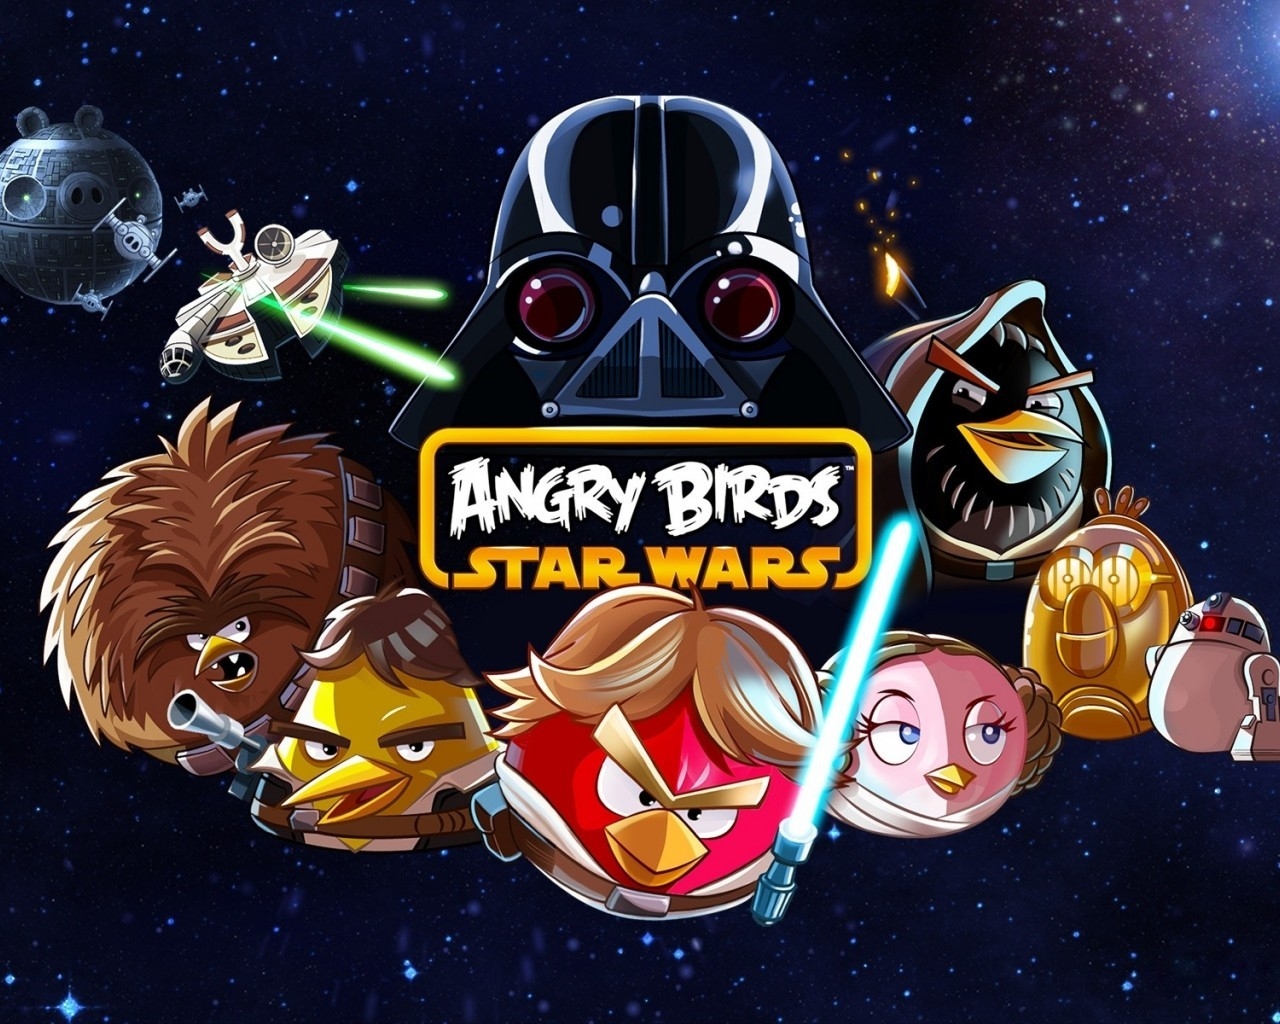 Angry Birds Star Wars for 1280 x 1024 resolution